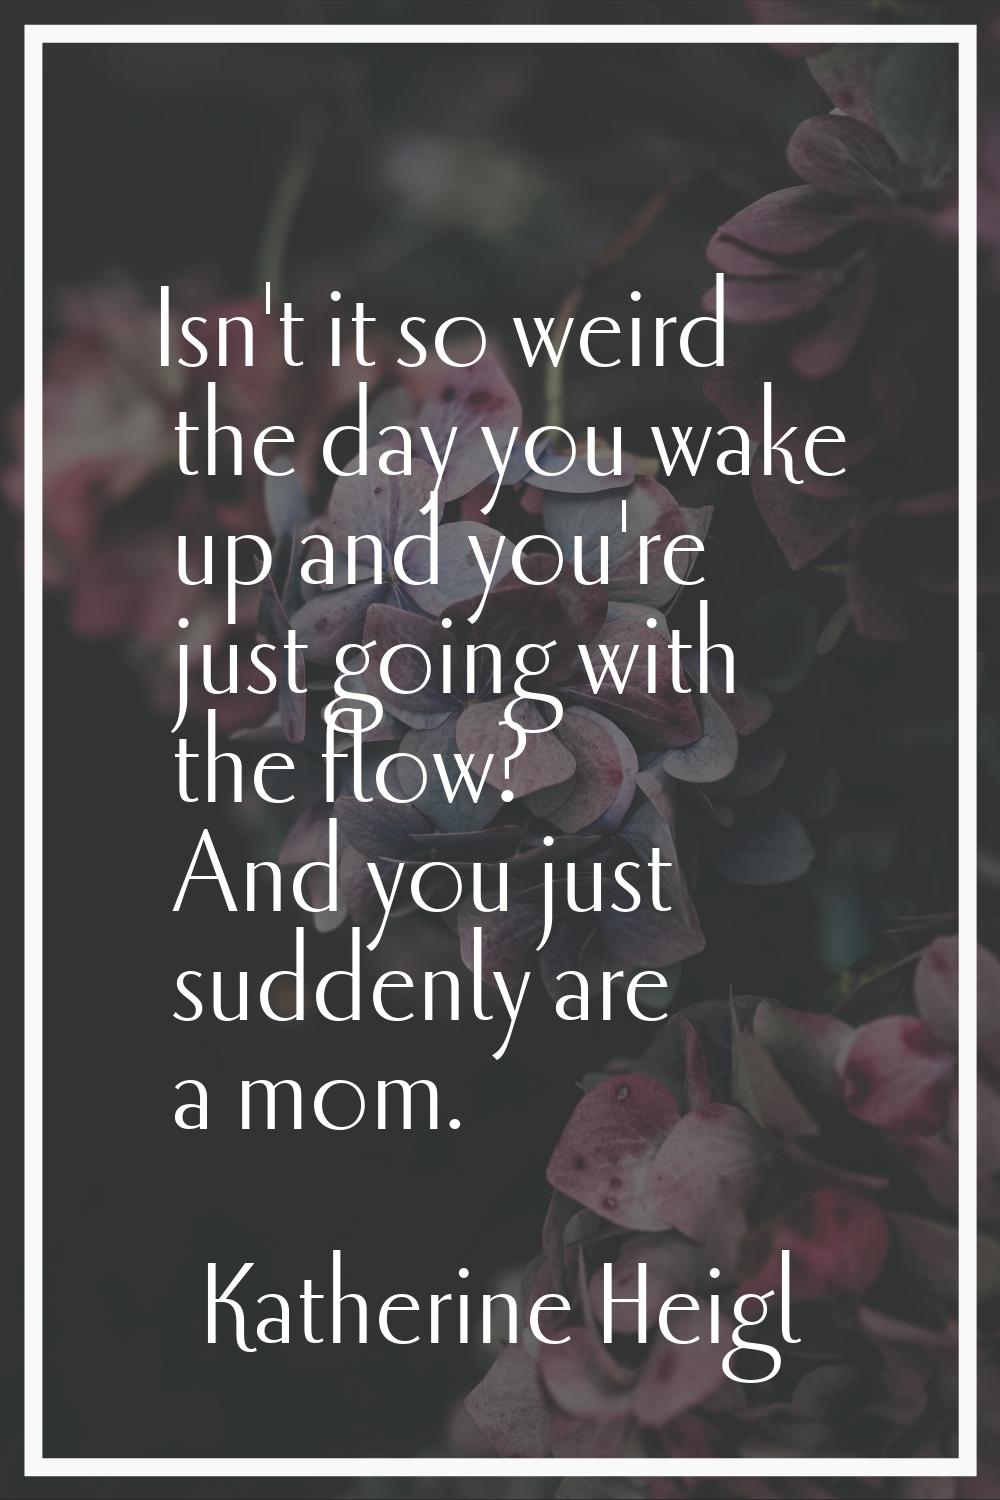 Isn't it so weird the day you wake up and you're just going with the flow? And you just suddenly ar